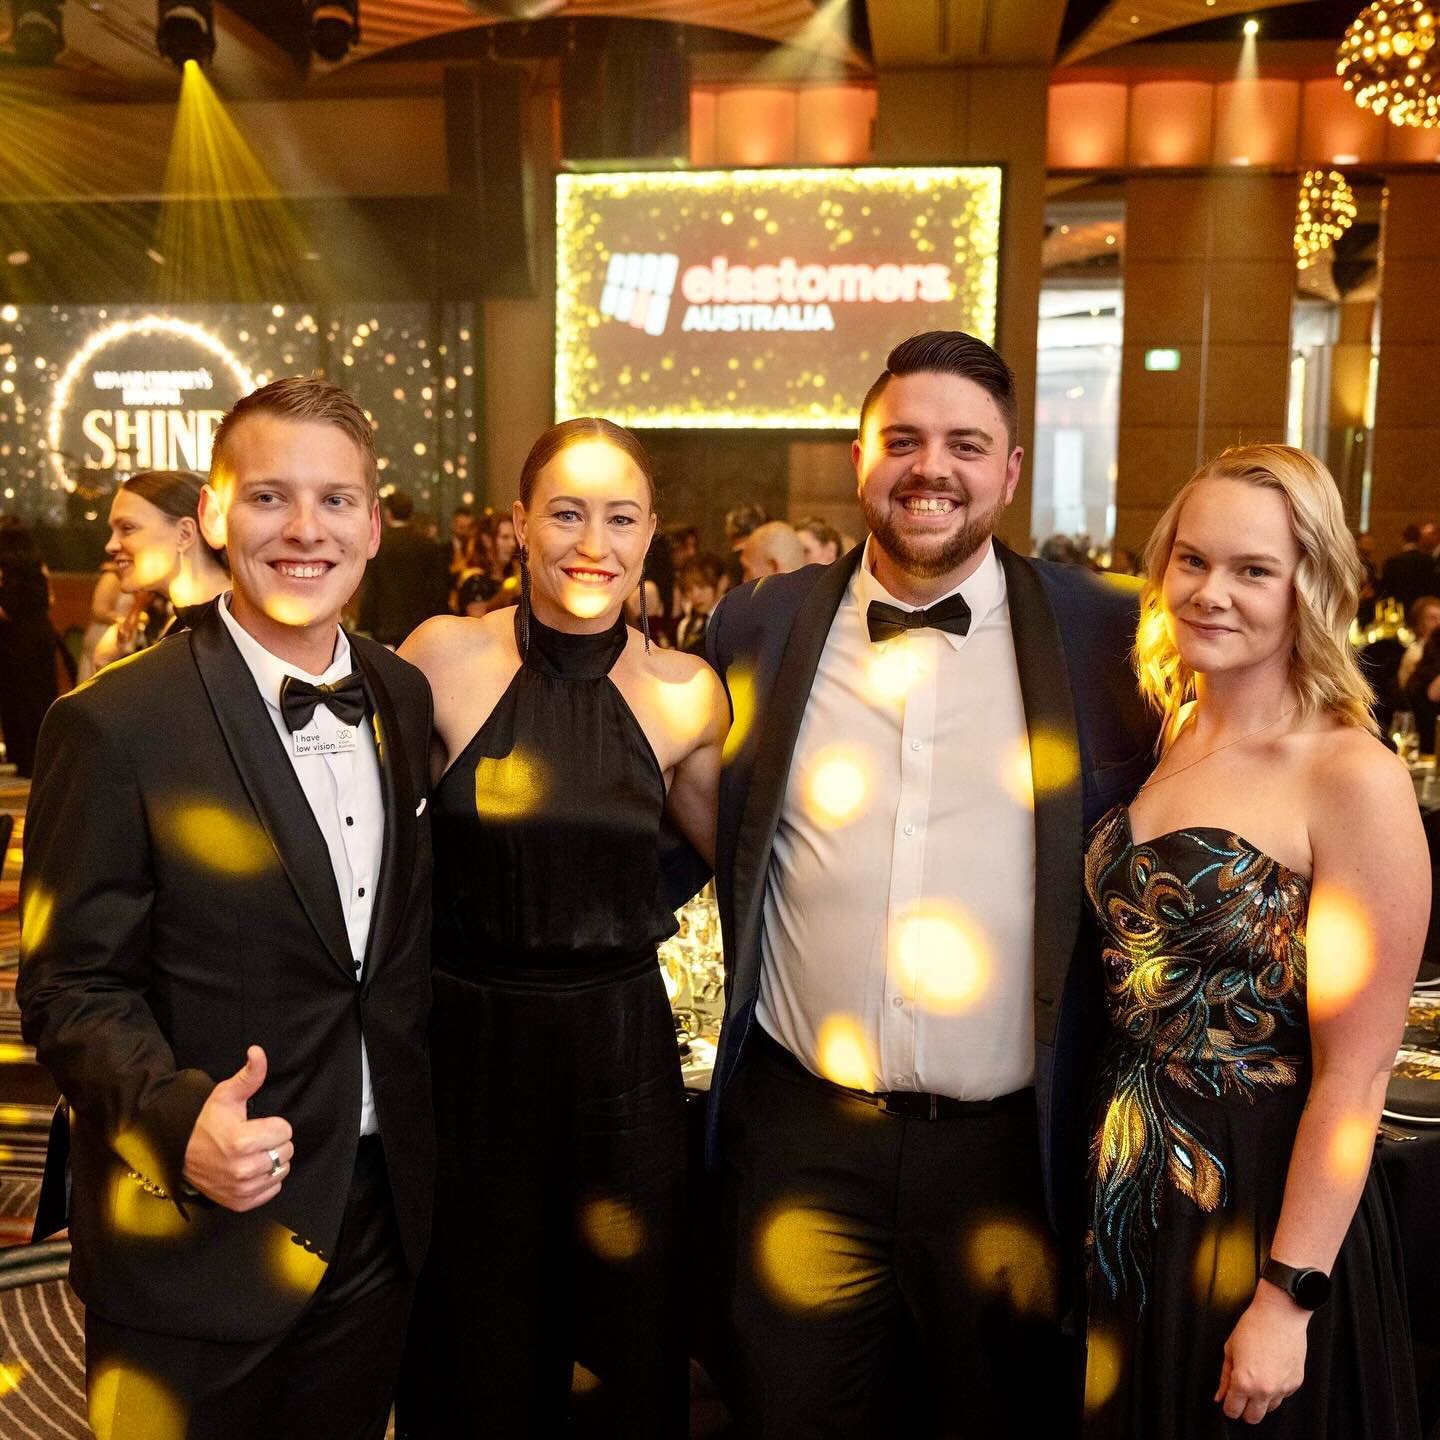 Monash Children&rsquo;s Hospital SHINE gala 2024! What an experience 🎩💛
The atmosphere it was with so much passion in the room was inspiring, over $1 Million was raised on the night  for Monash Children&rsquo;s Hospital.
 A great cause &amp; event.